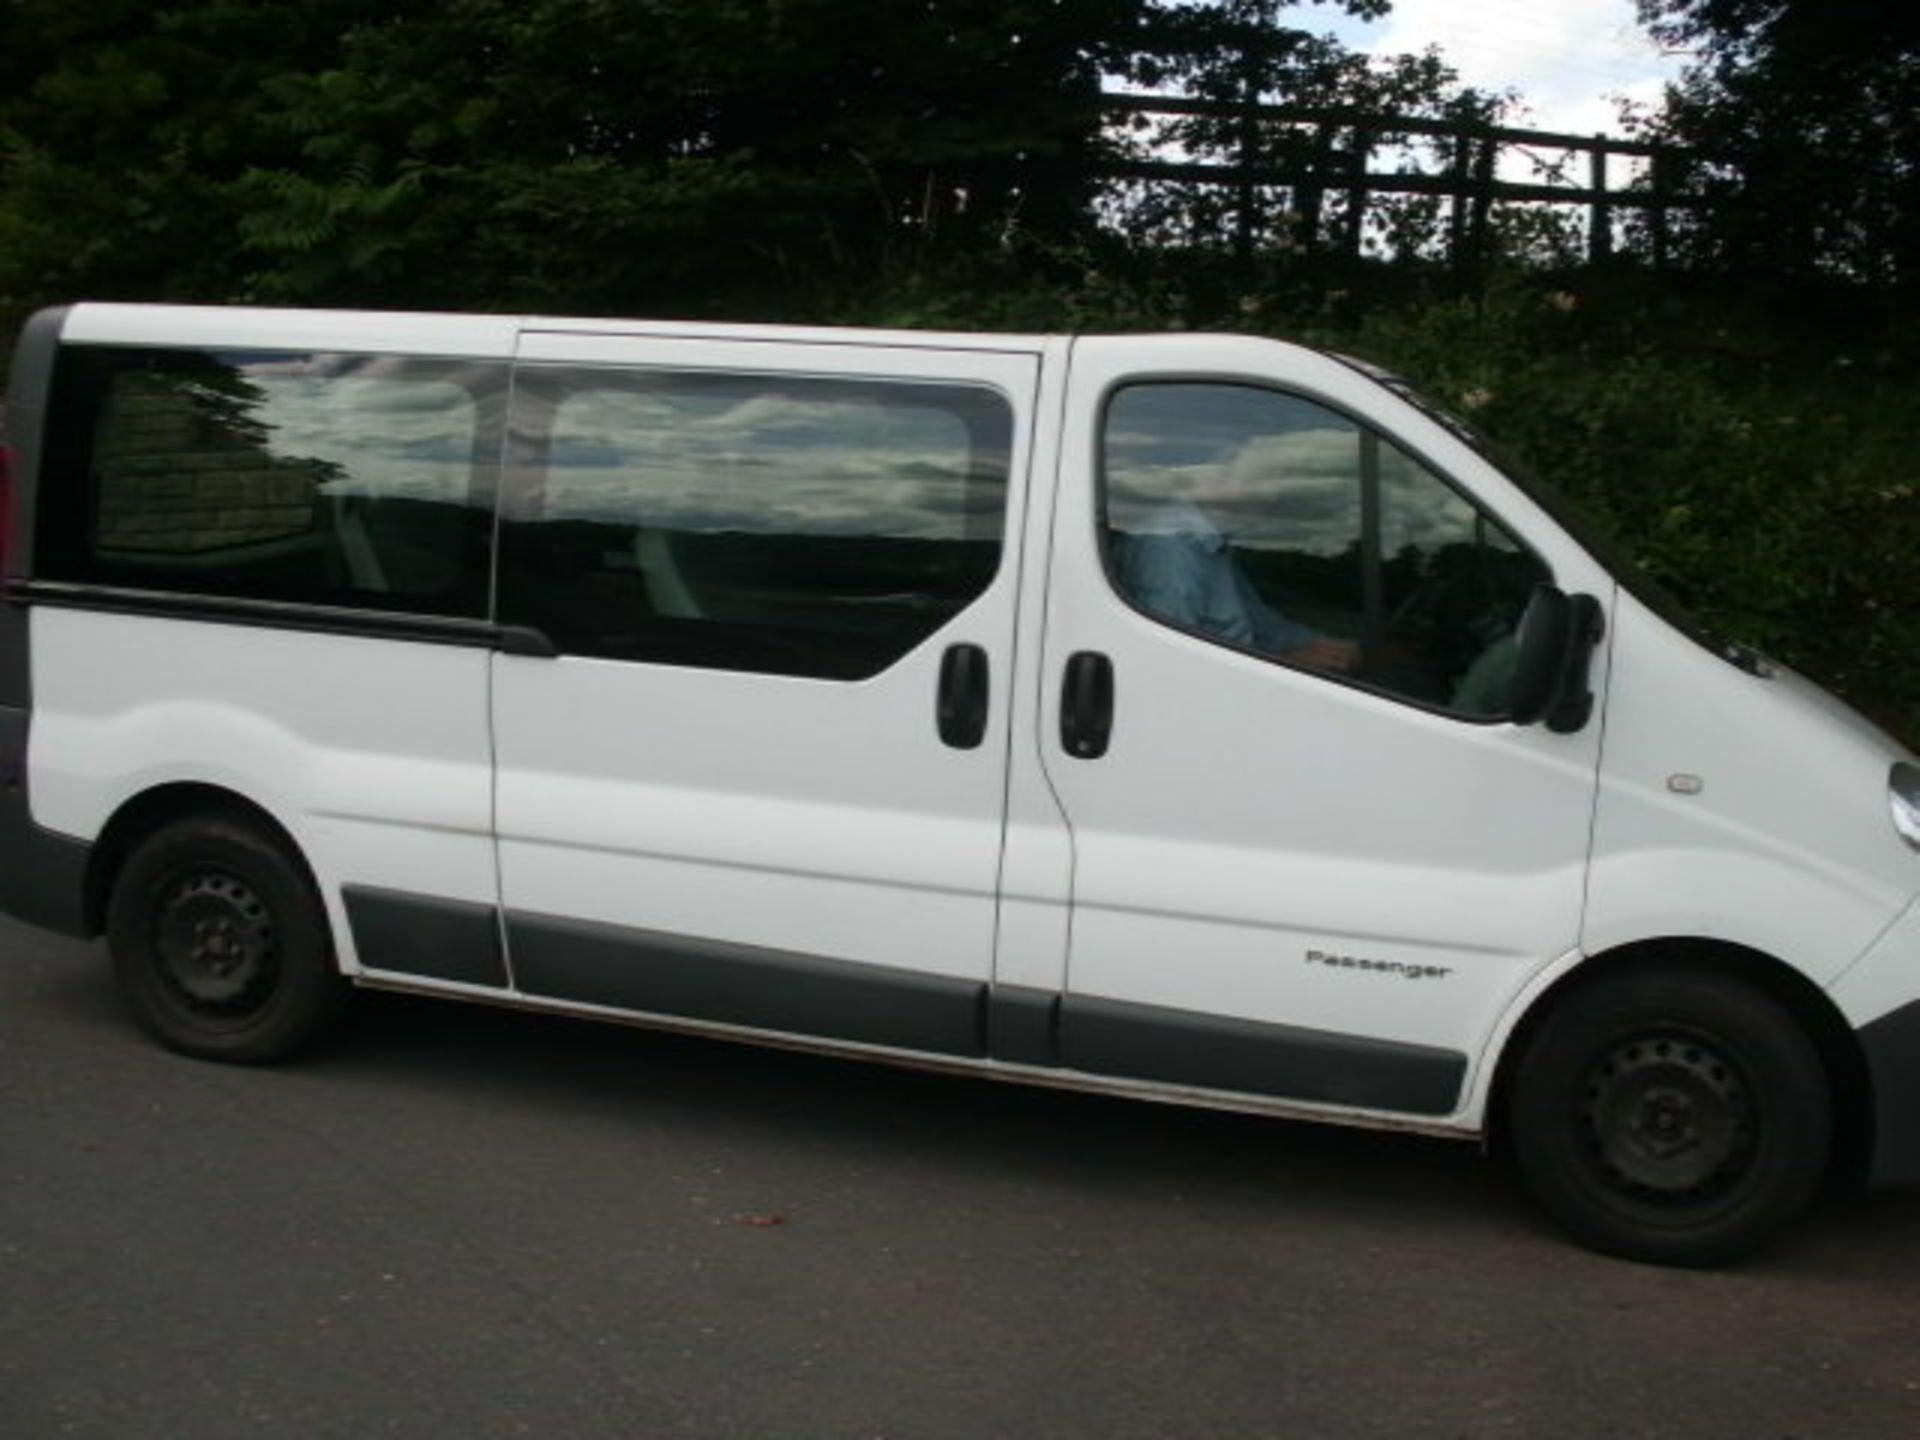 2008 (Oct) RENAULT TRAFIC LL29 Dci 115 9 seater MINI BUS including driver, white, diesel, 1995cc, - Image 2 of 4